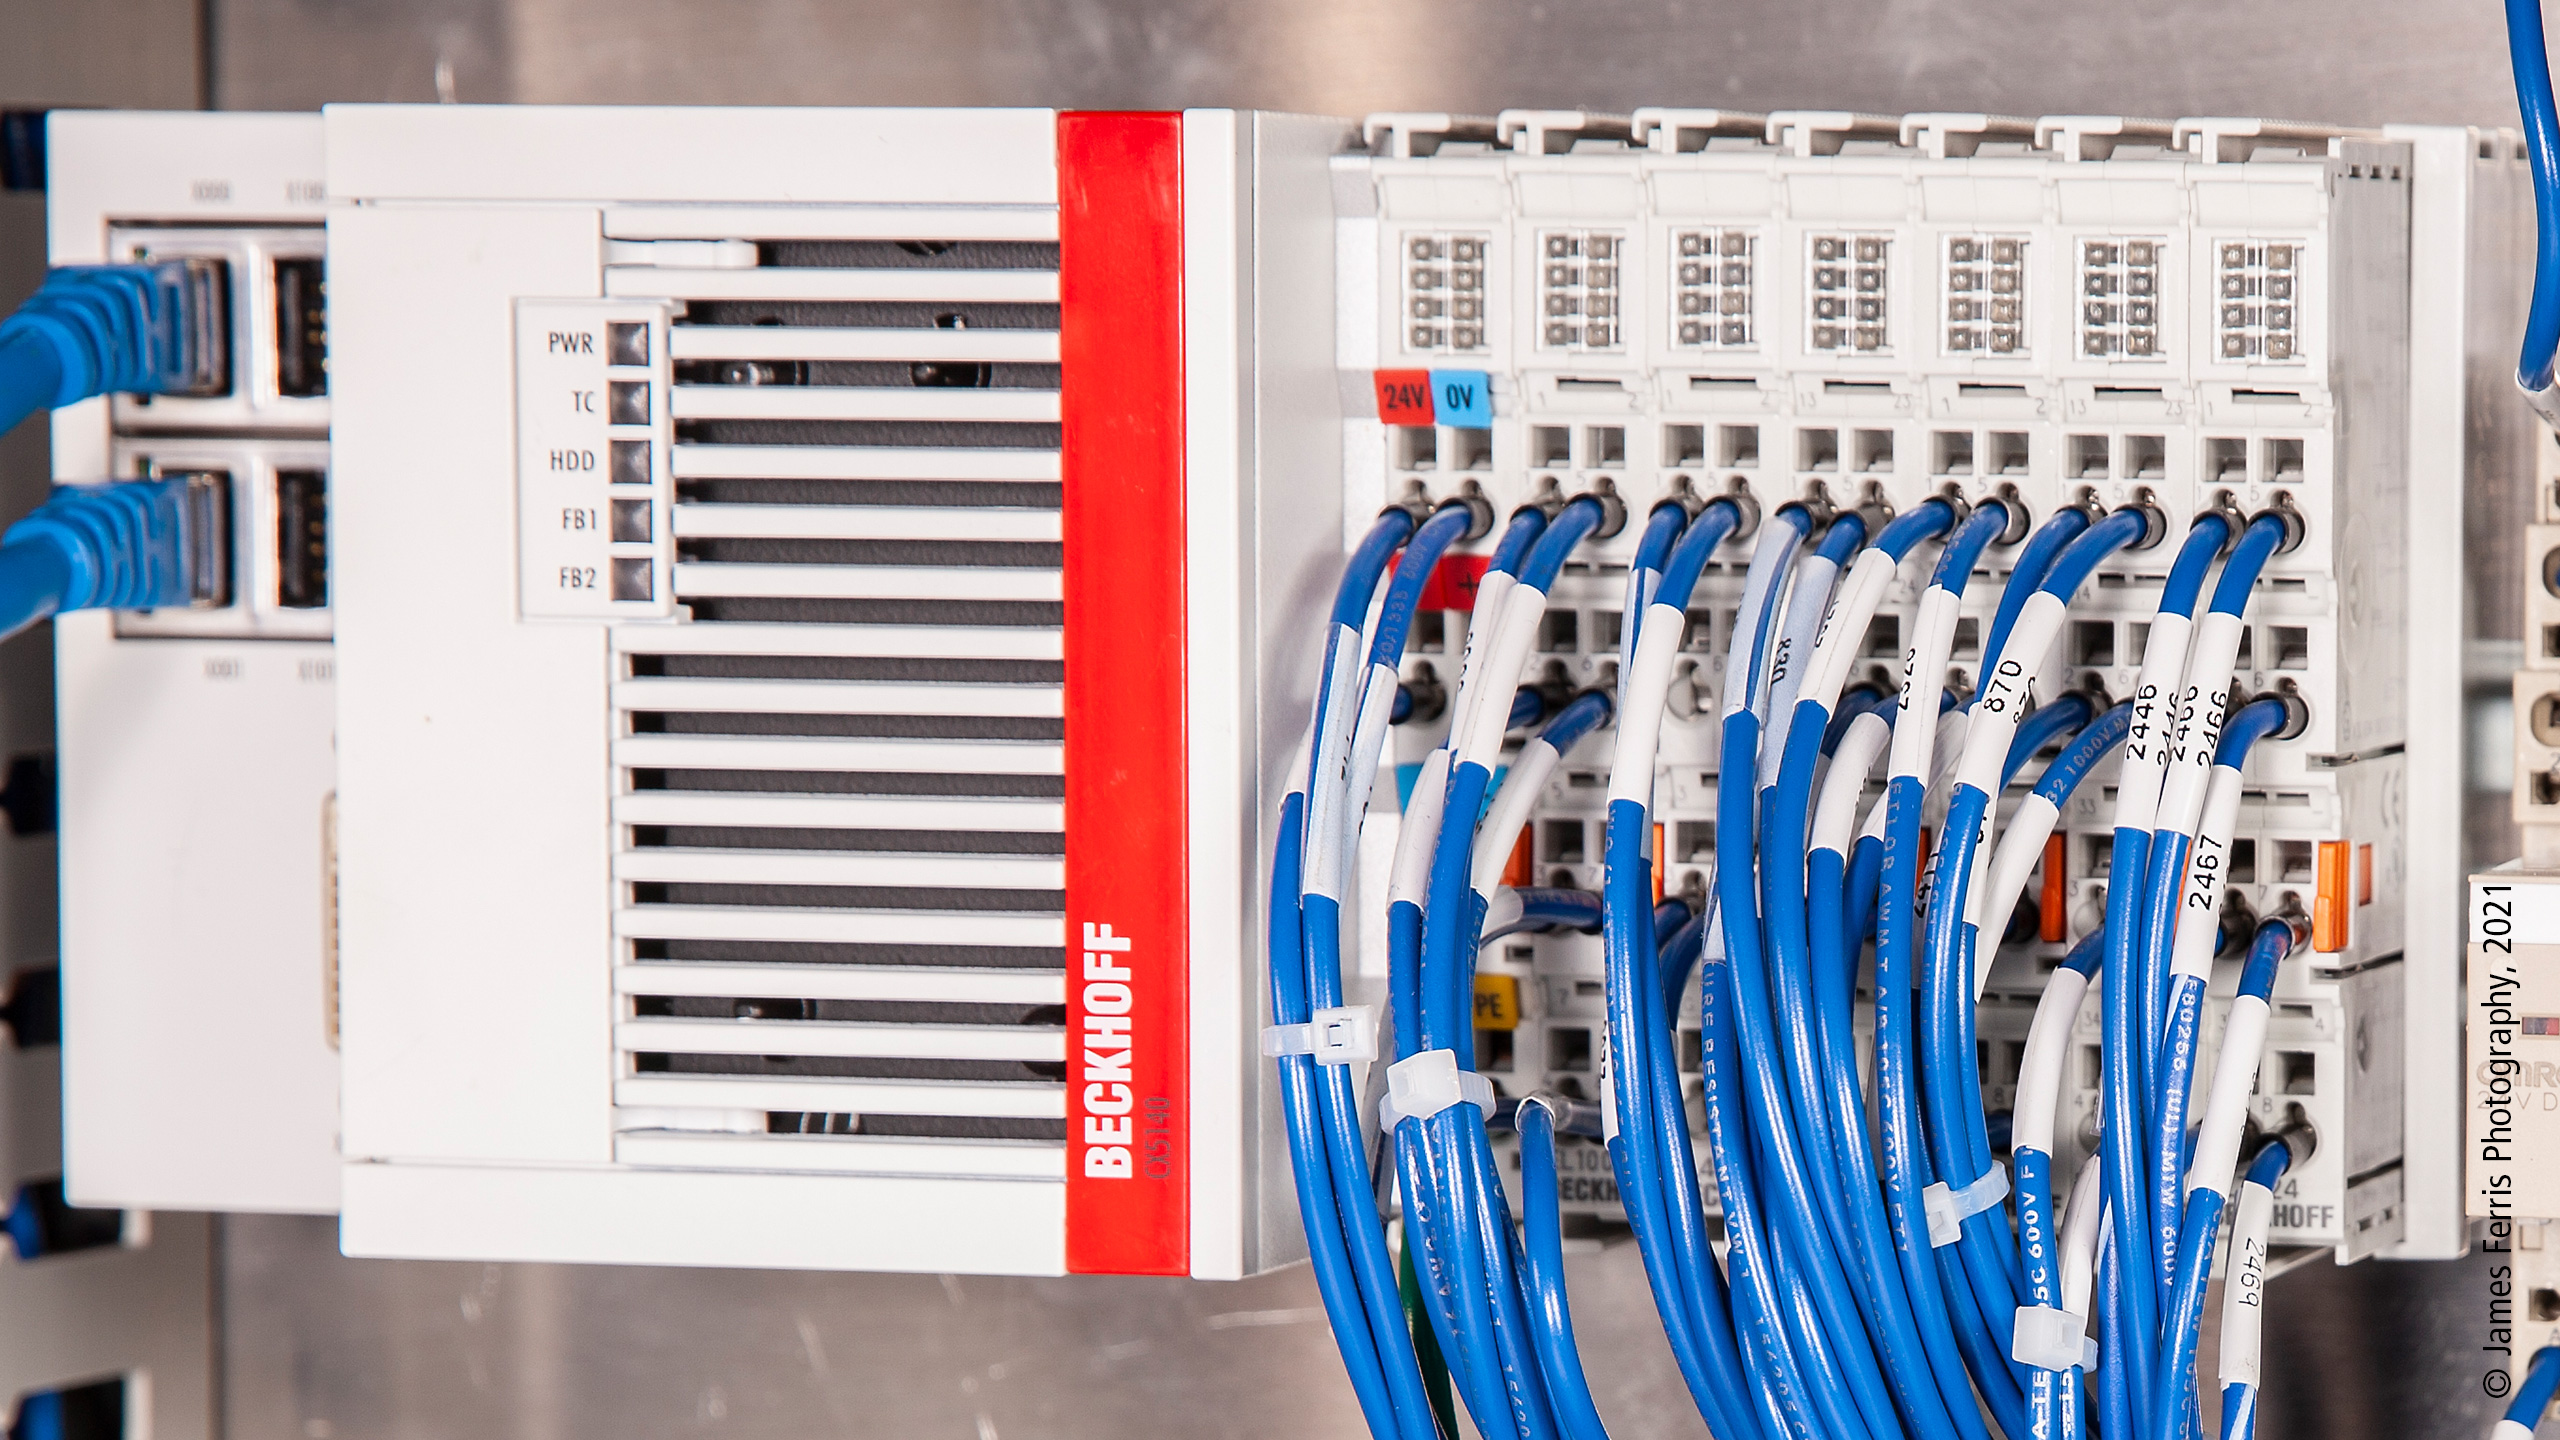 A CX5140 Embedded PC and various EtherCAT I/O Terminals provide optimal control and networking for the ProSpection machine.  